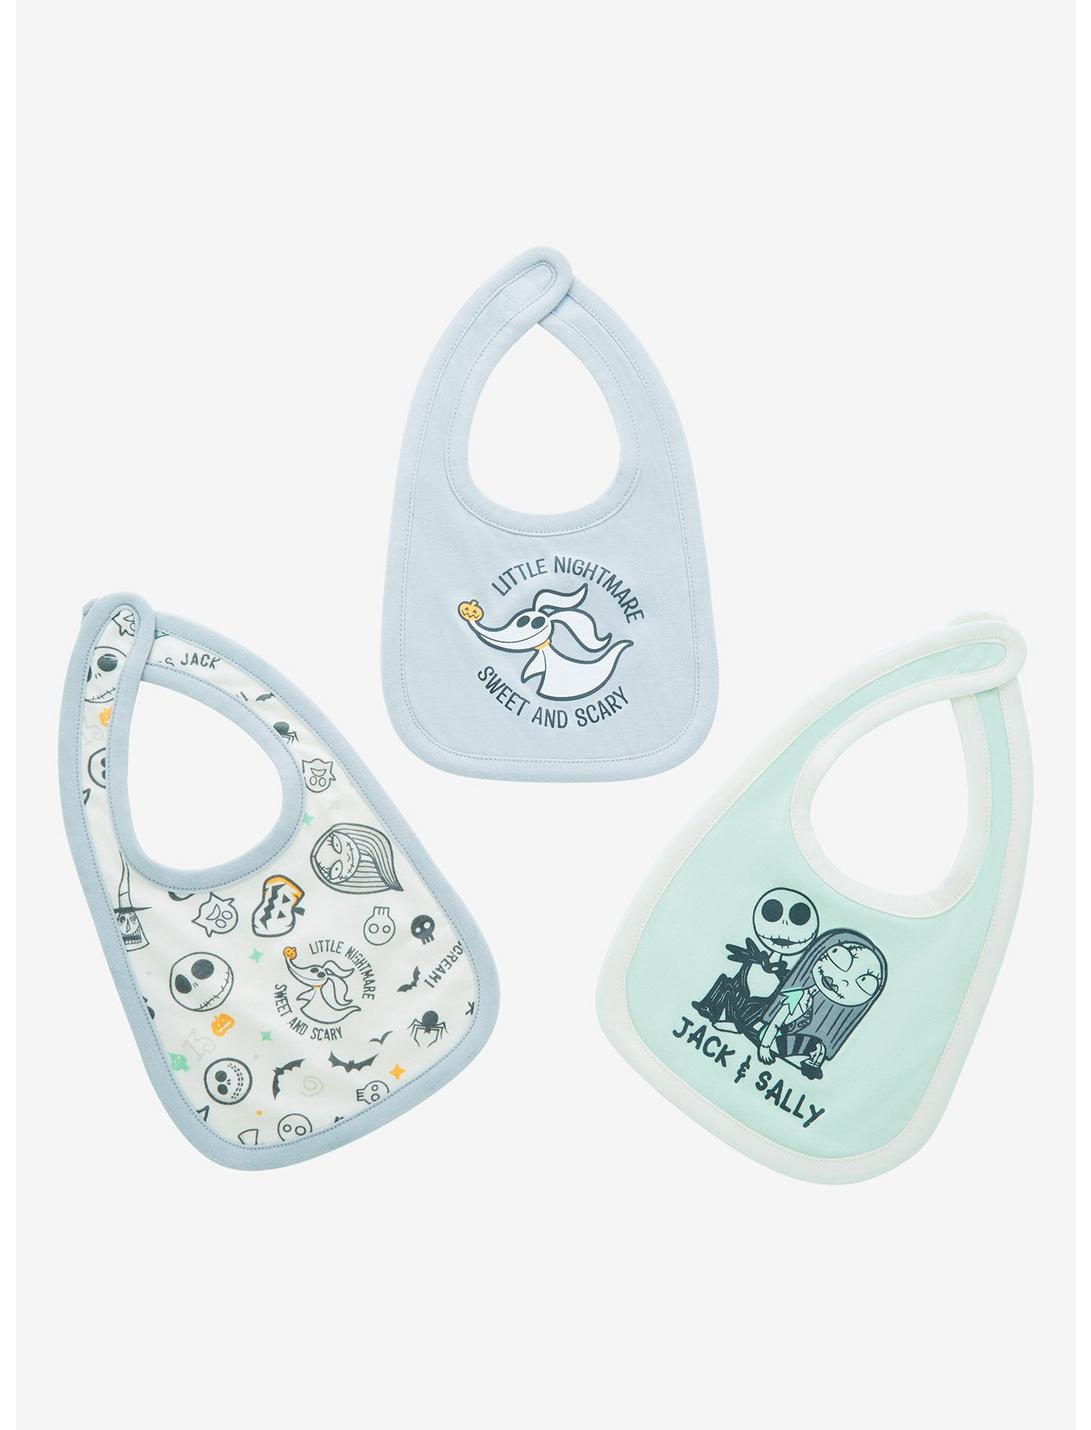 Disney The Nightmare Before Christmas Icons Bib Set - BoxLunch Exclusive, , hi-res